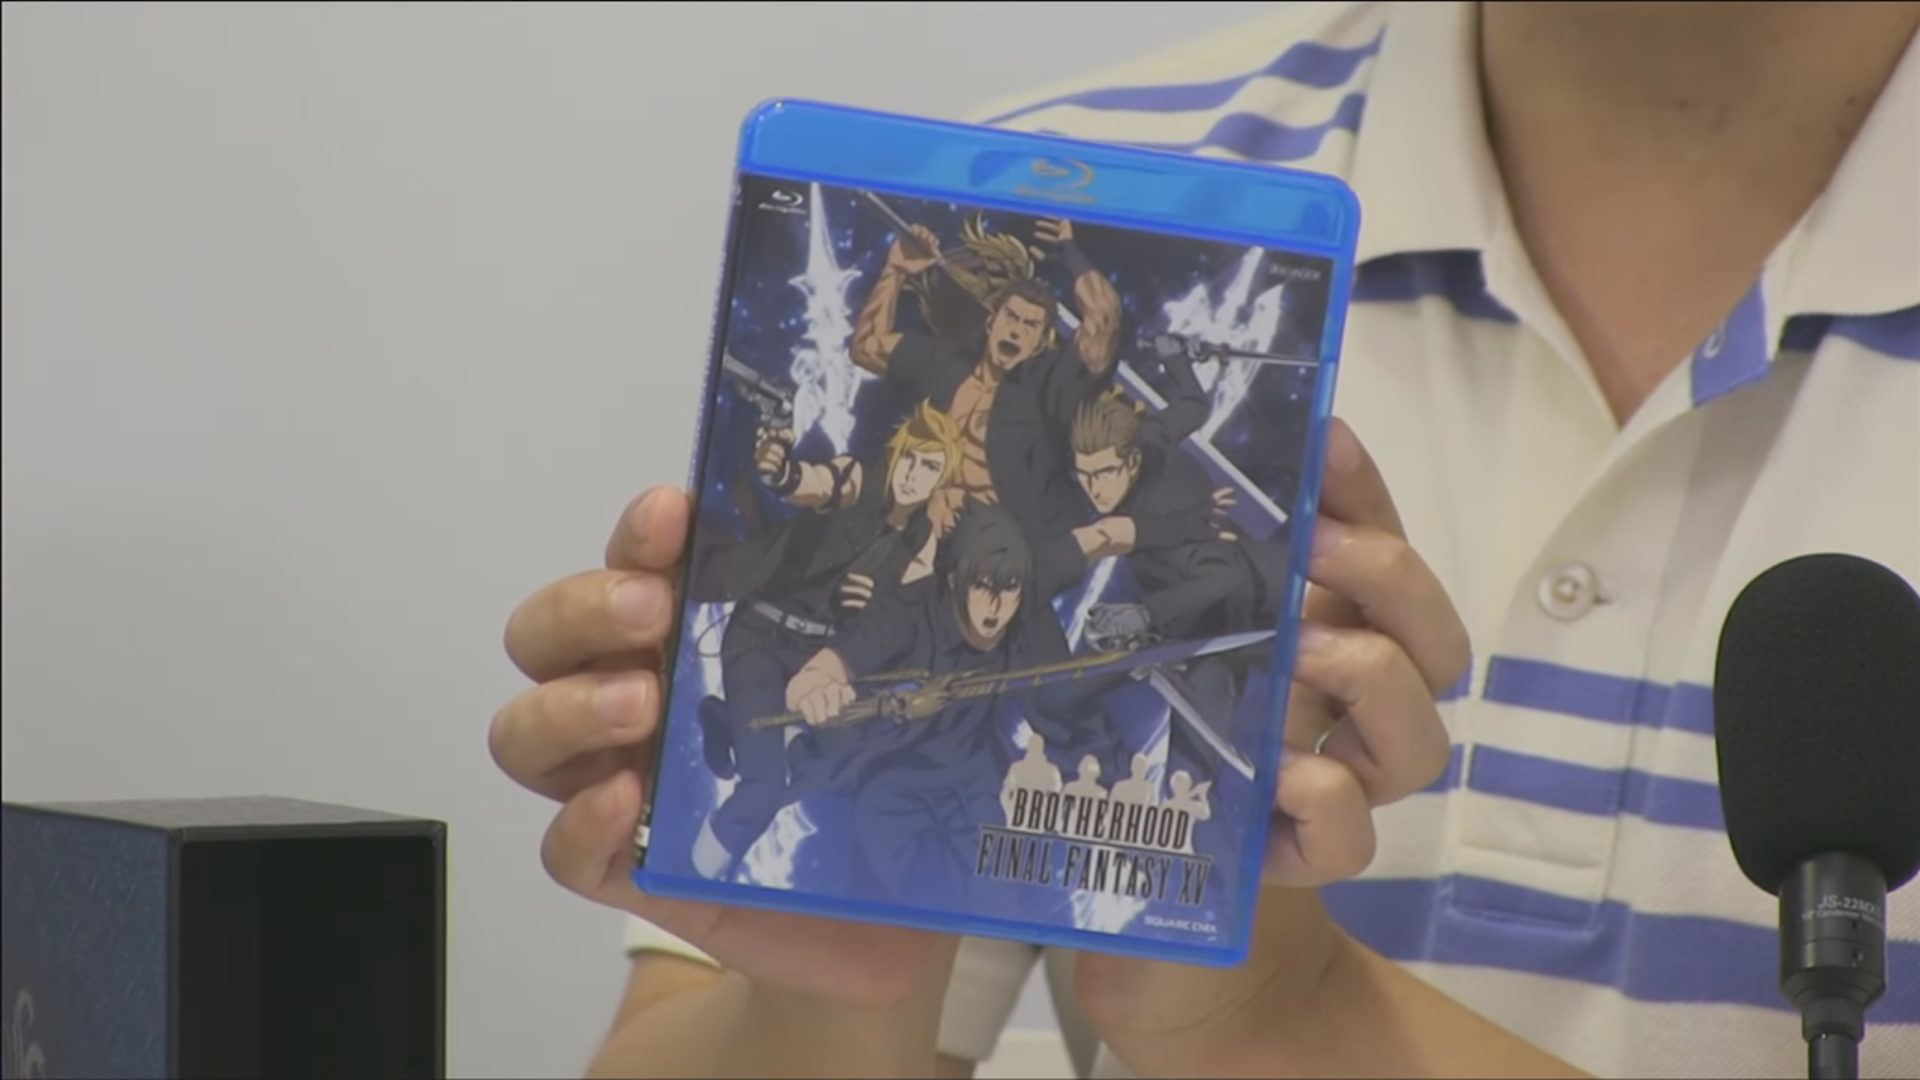 Final Fantasy XV “Film Collections Box” Special Edition with Game 